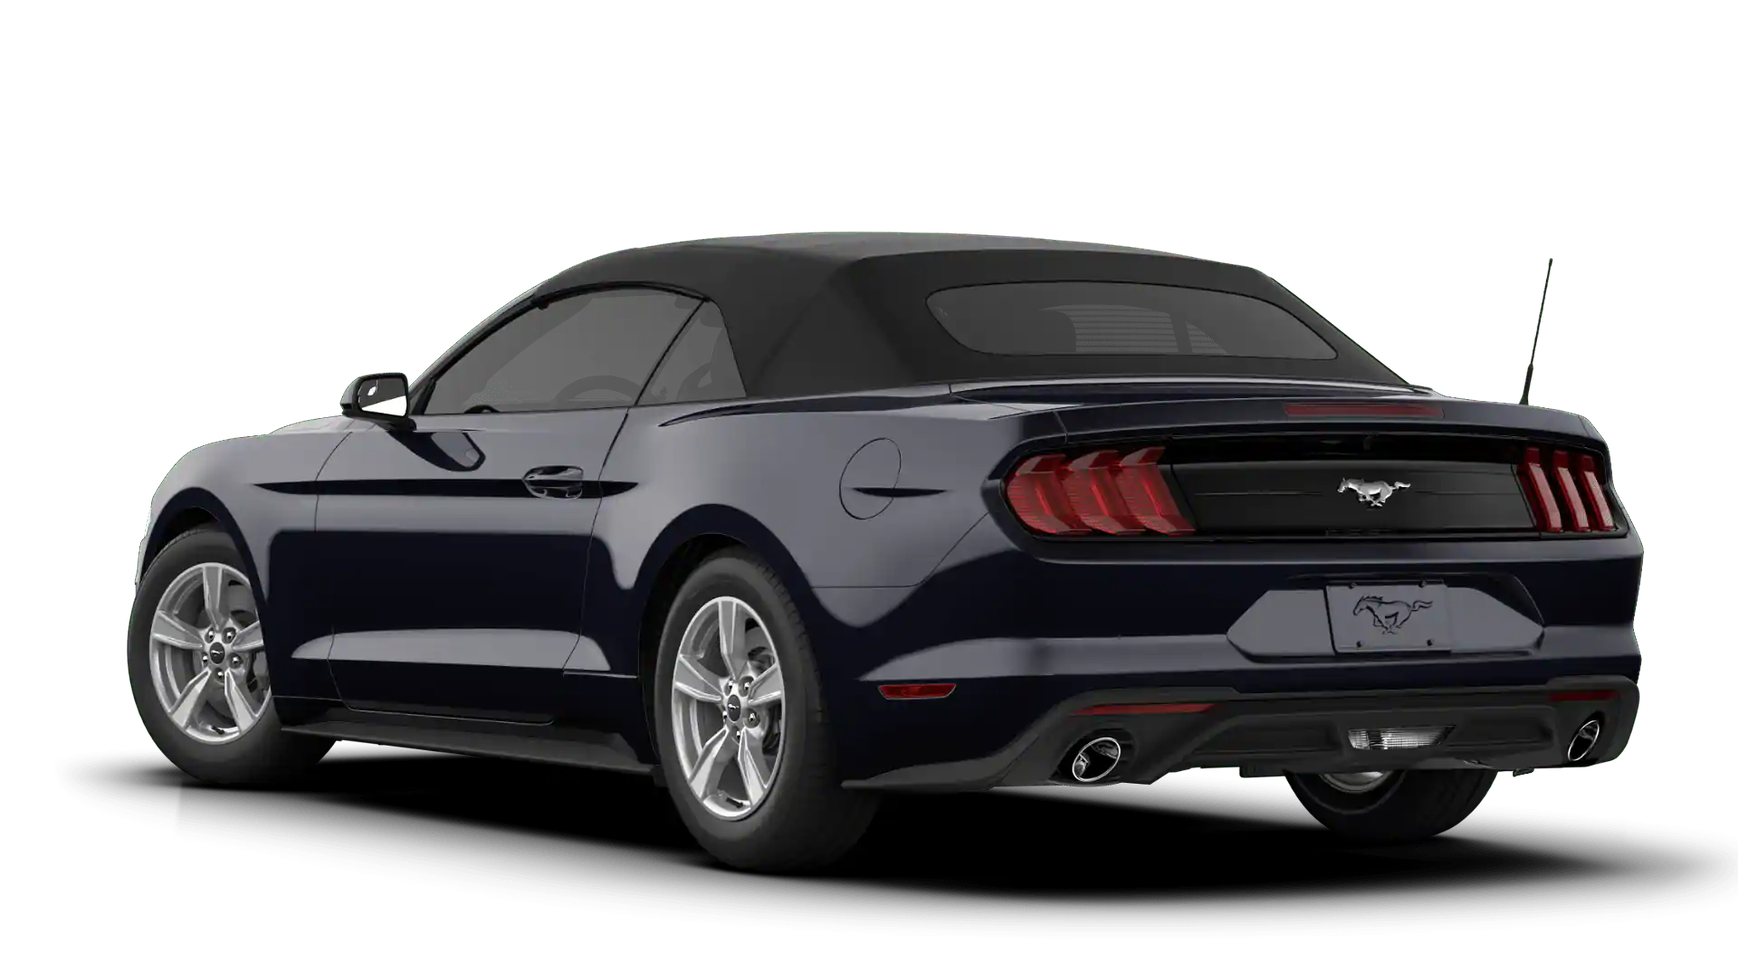 Ford Mustang EcoBoost® Convertible 2020